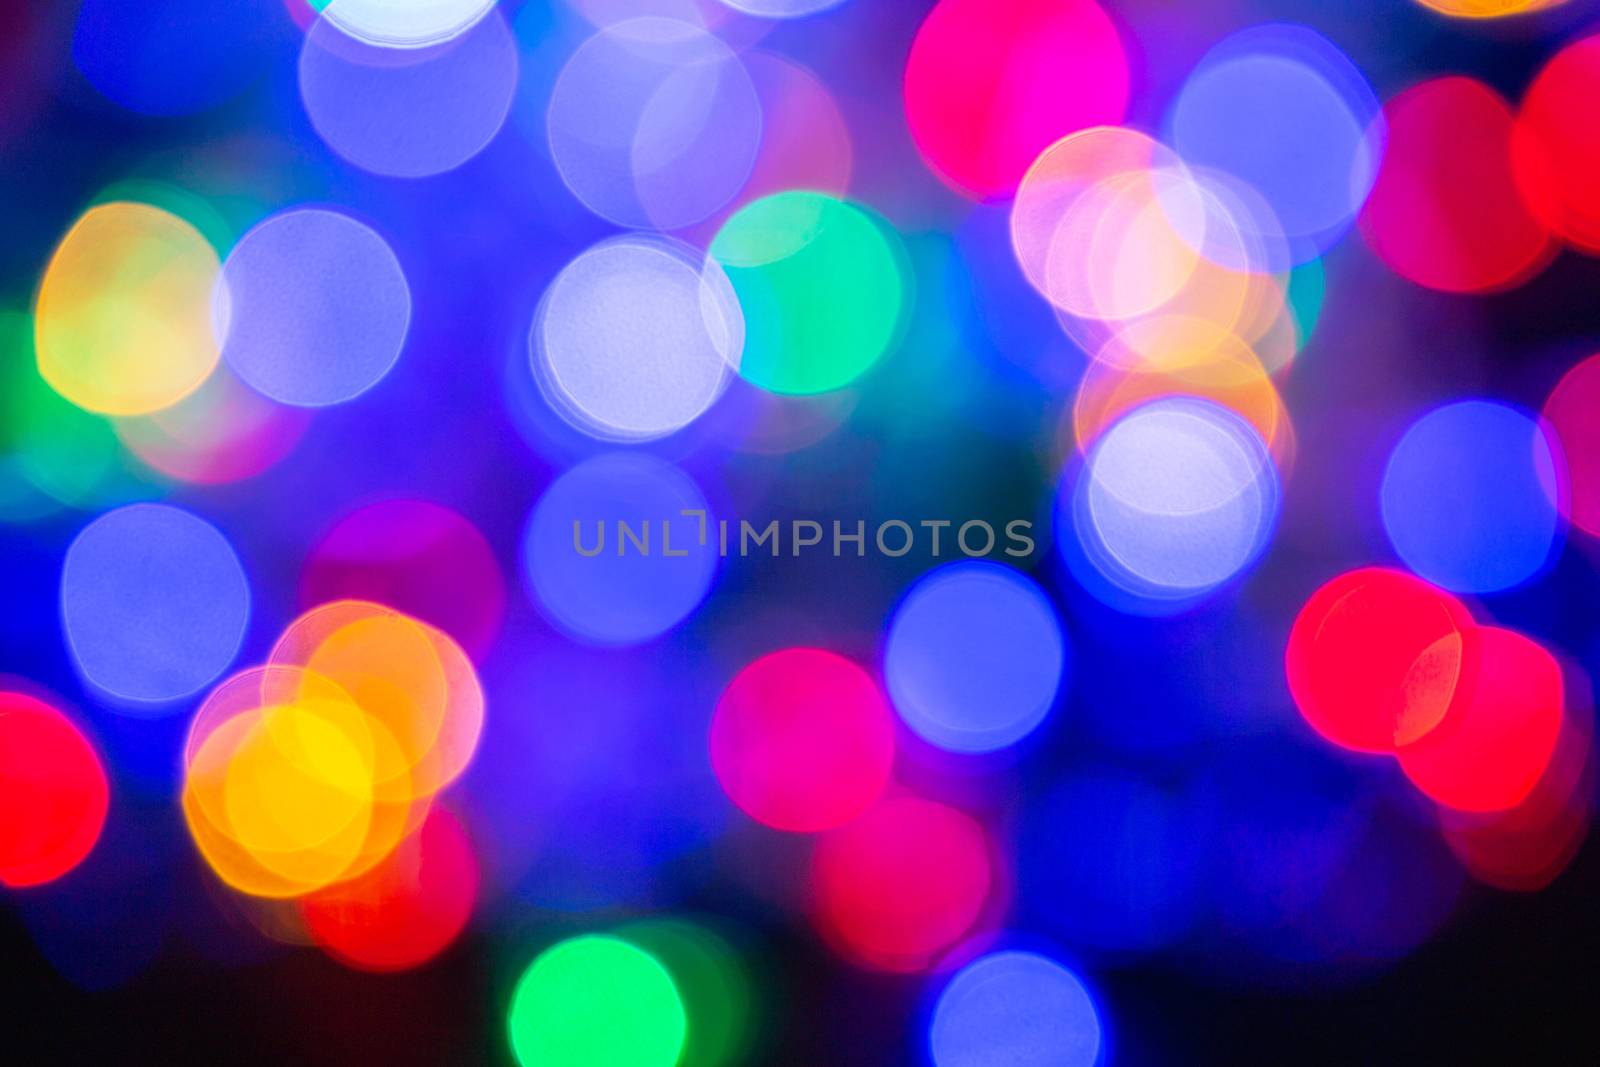 Colorful abstract blurred circular bokeh light of night city street for background. graphic design and website template design.